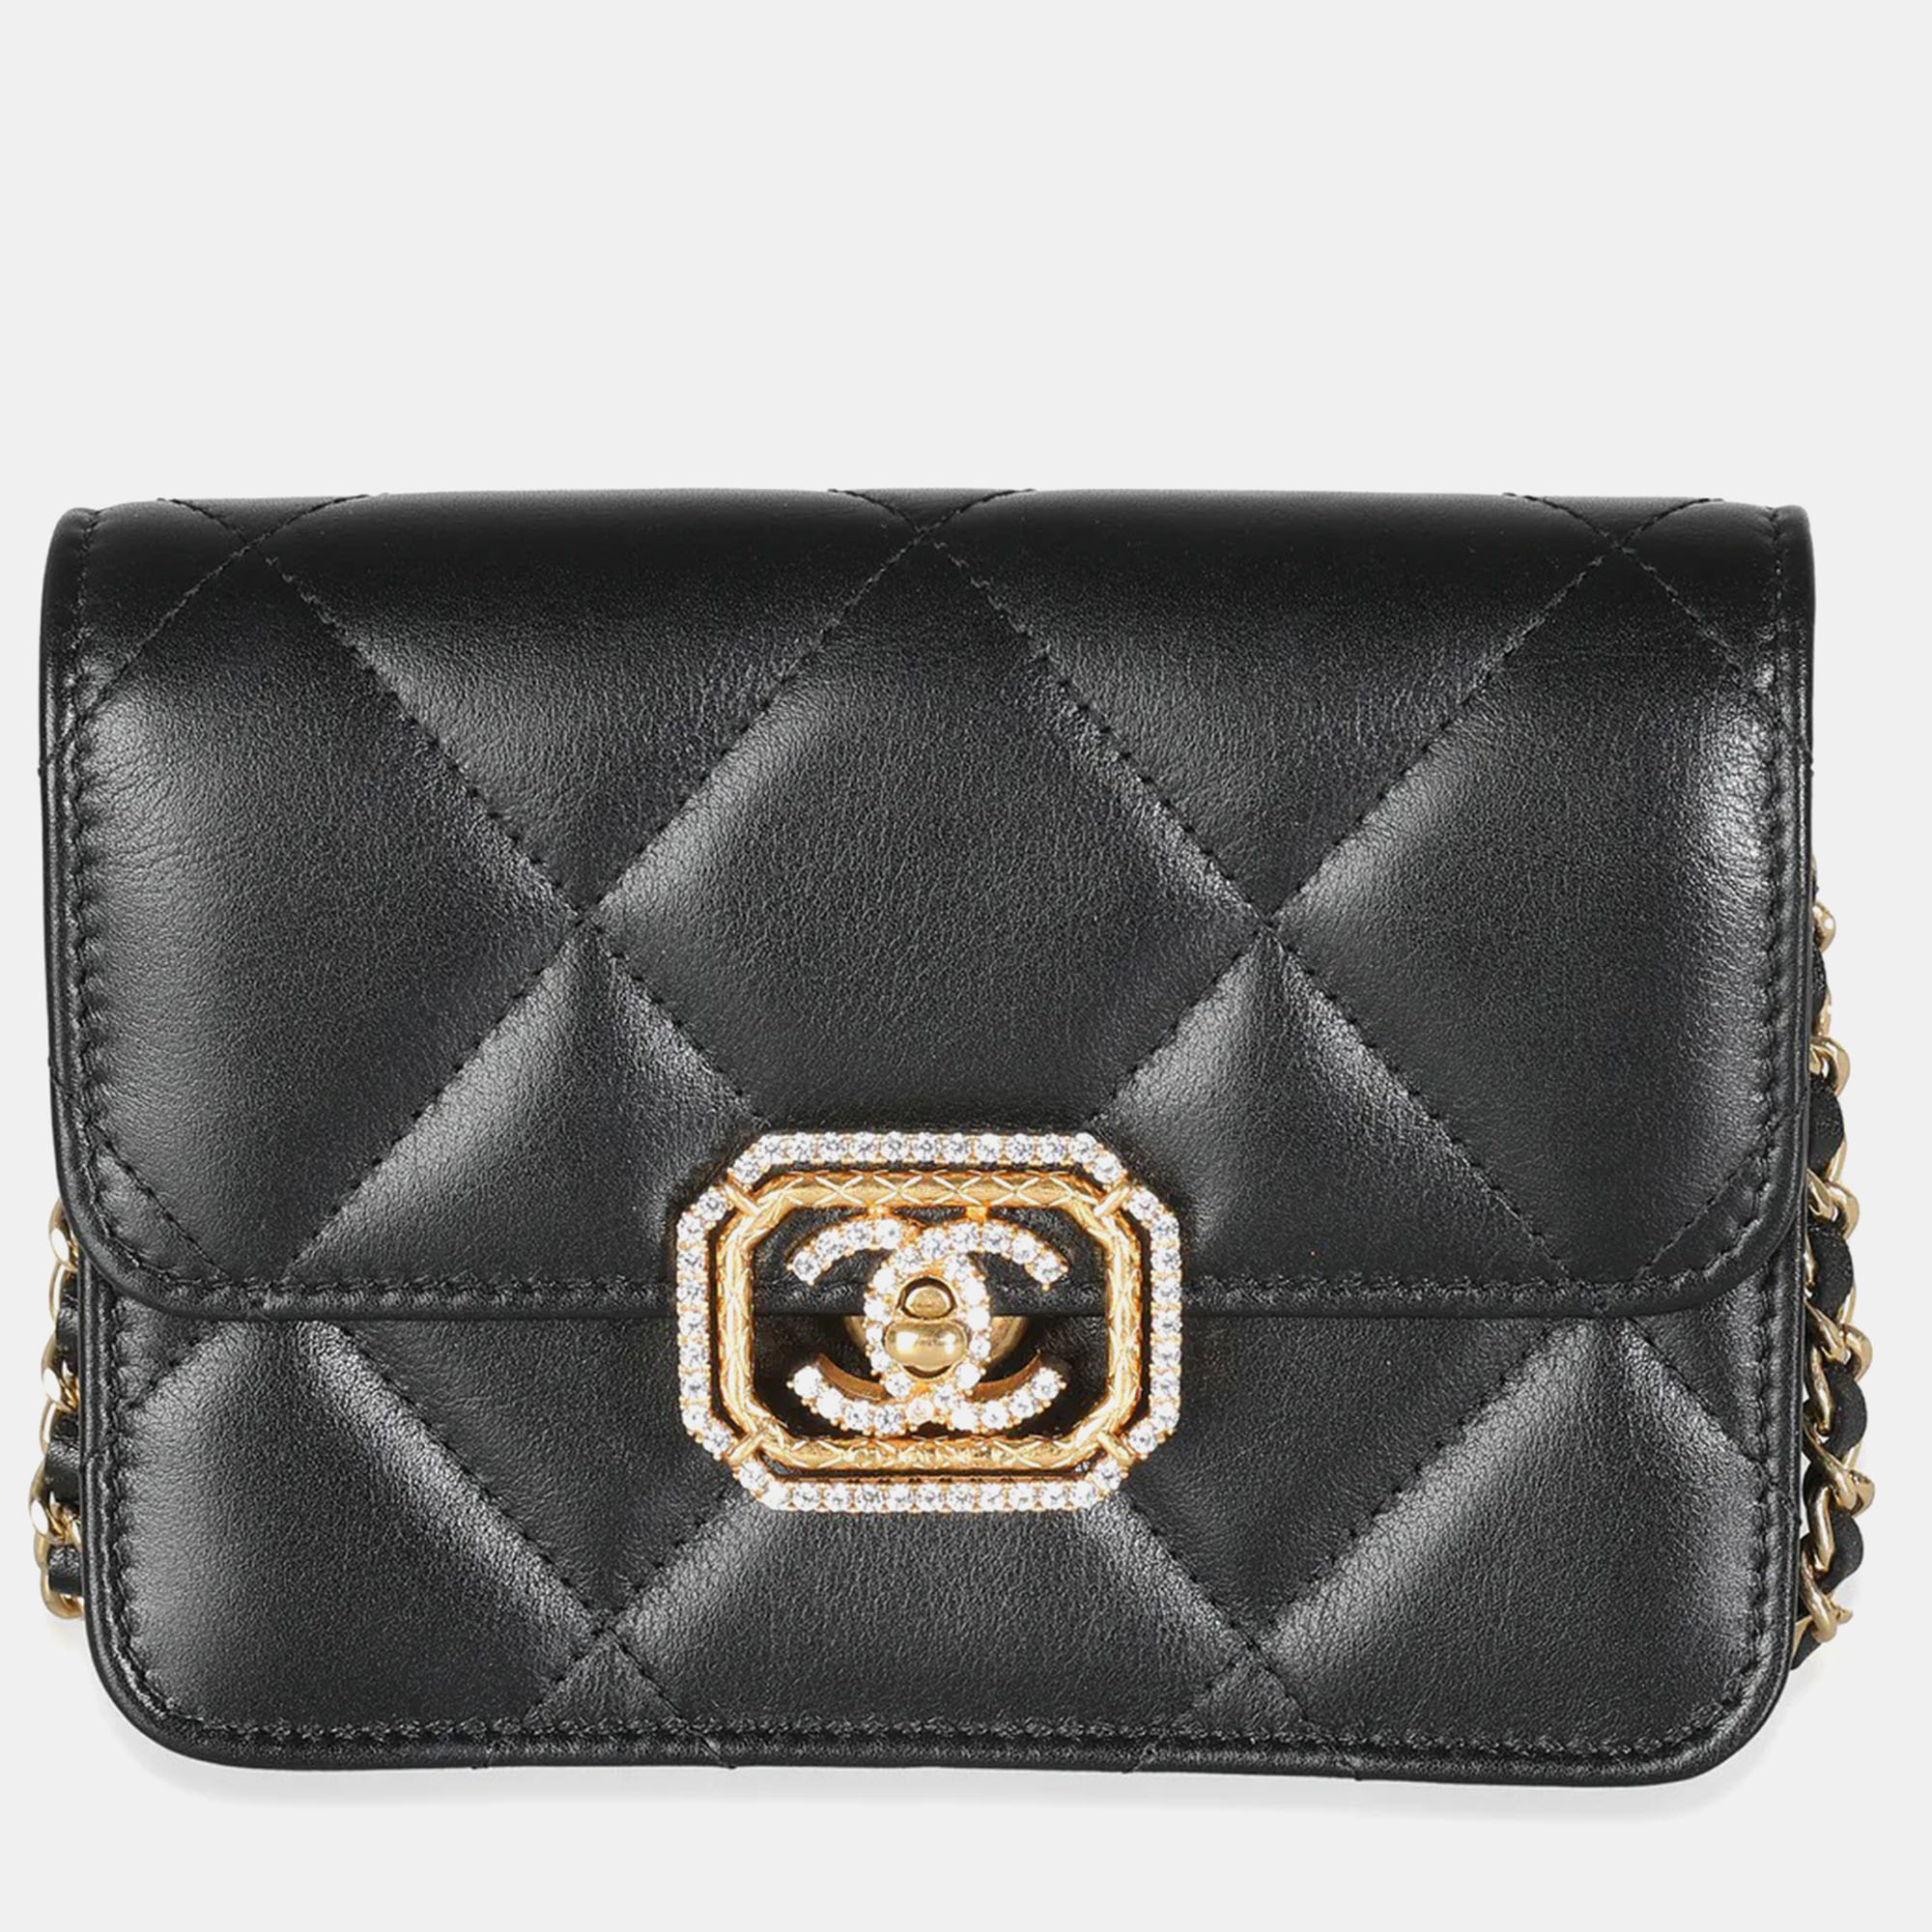 

Chanel Black Quilted Calfskin Leather Strass Mini CC Flap Bag